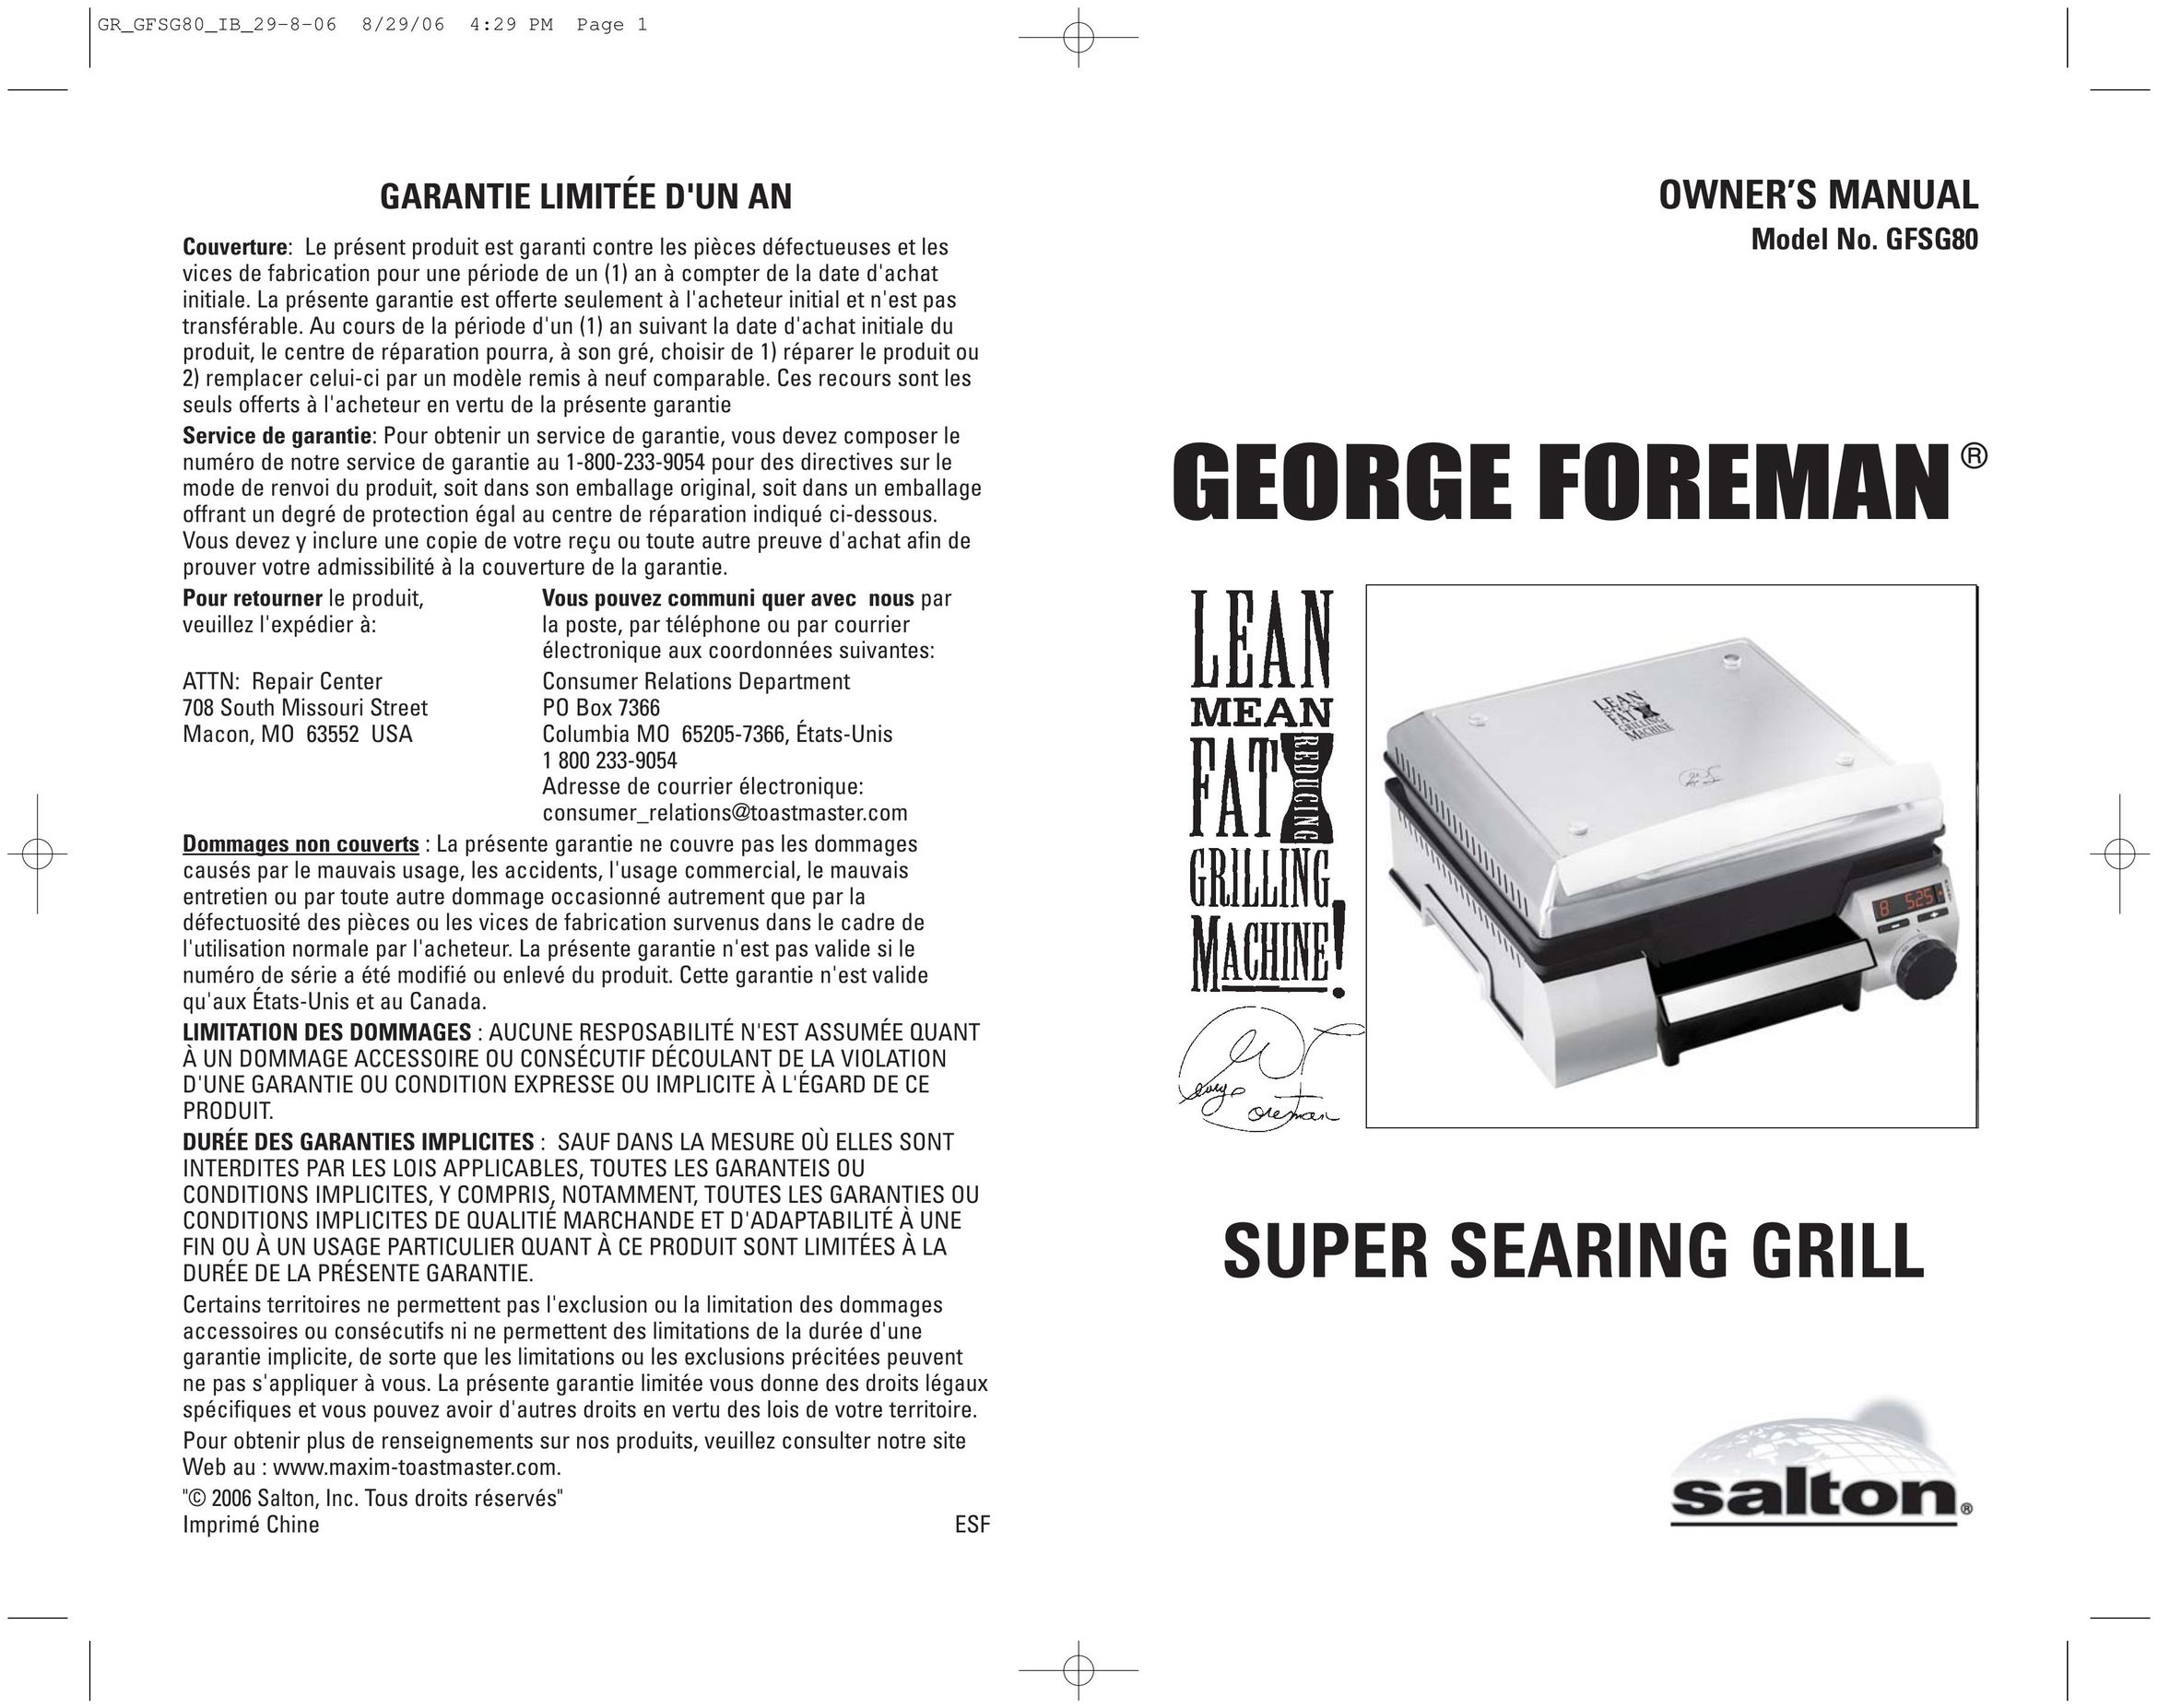 George Foreman GFSG80 Kitchen Grill User Manual